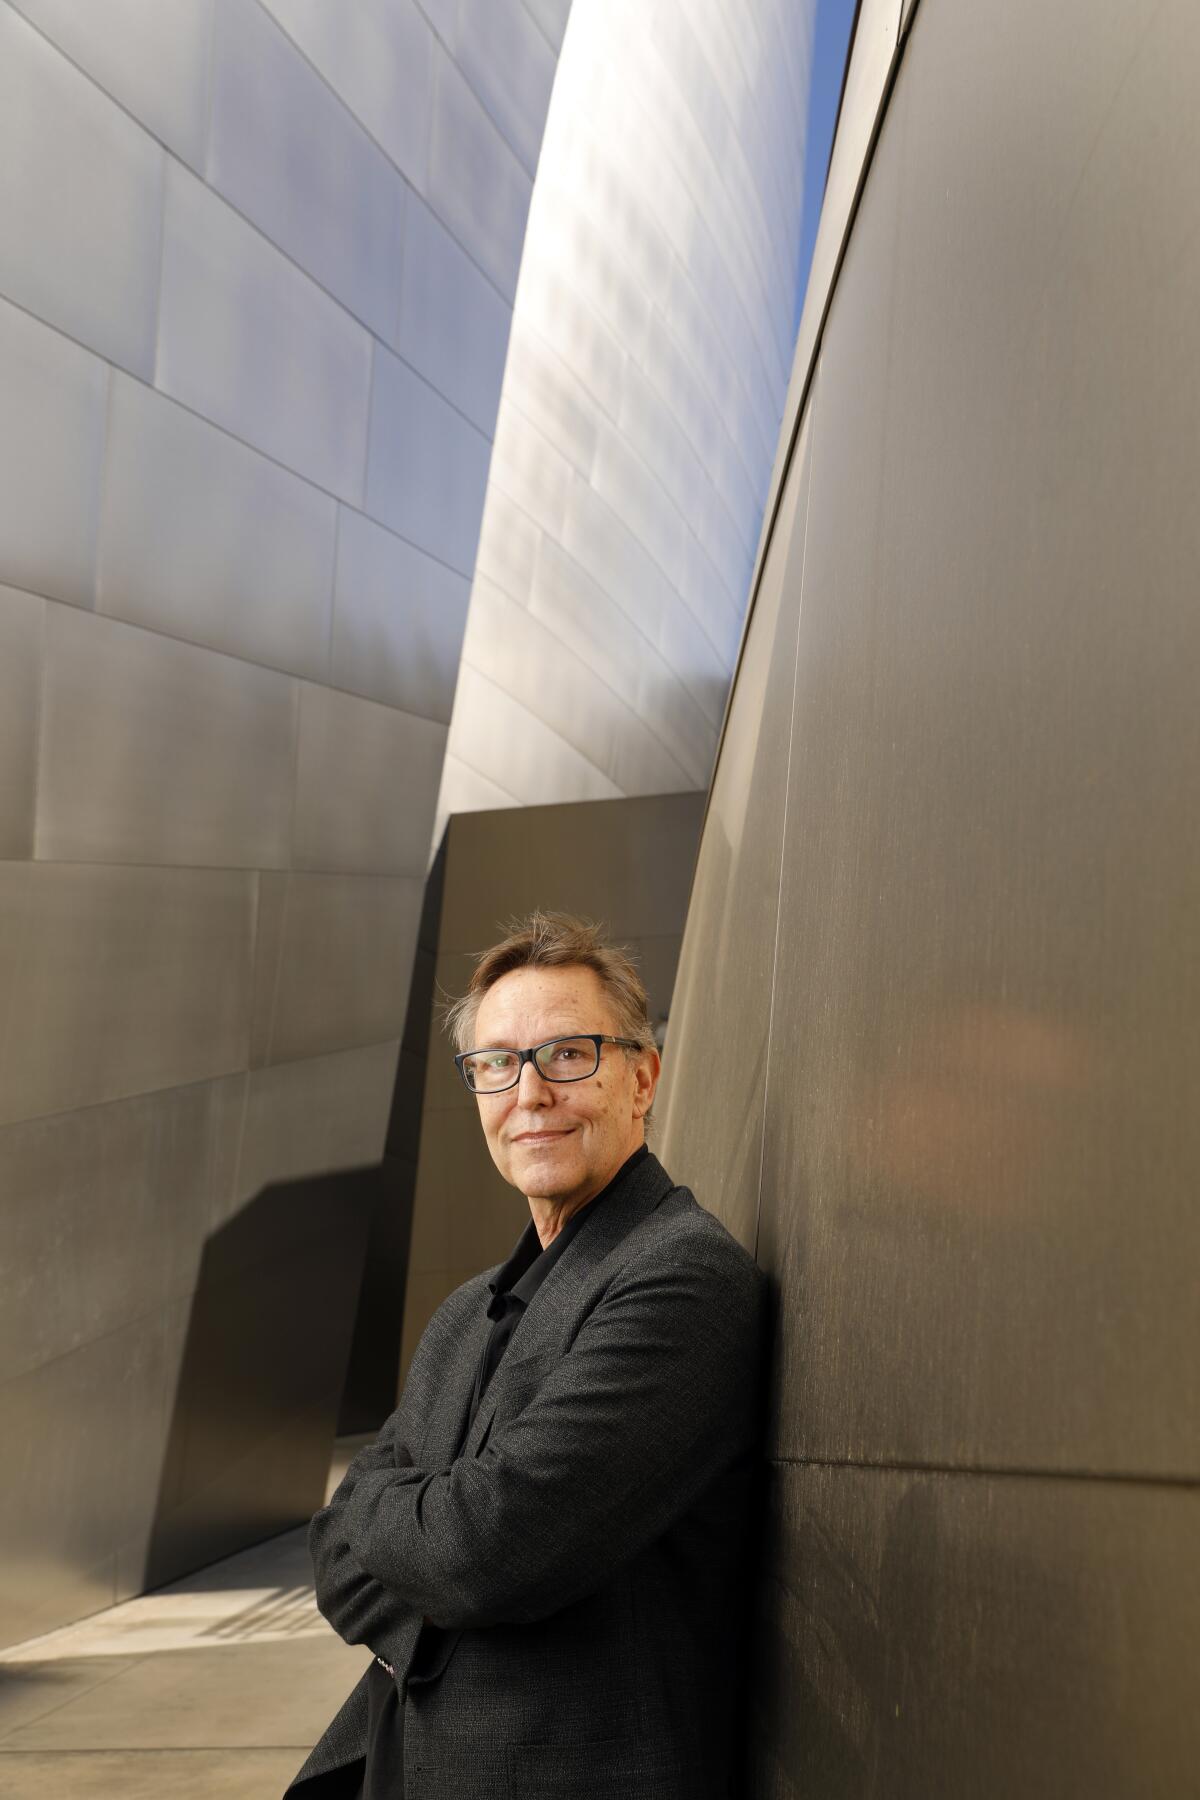 A man in glasses poses against a wall.